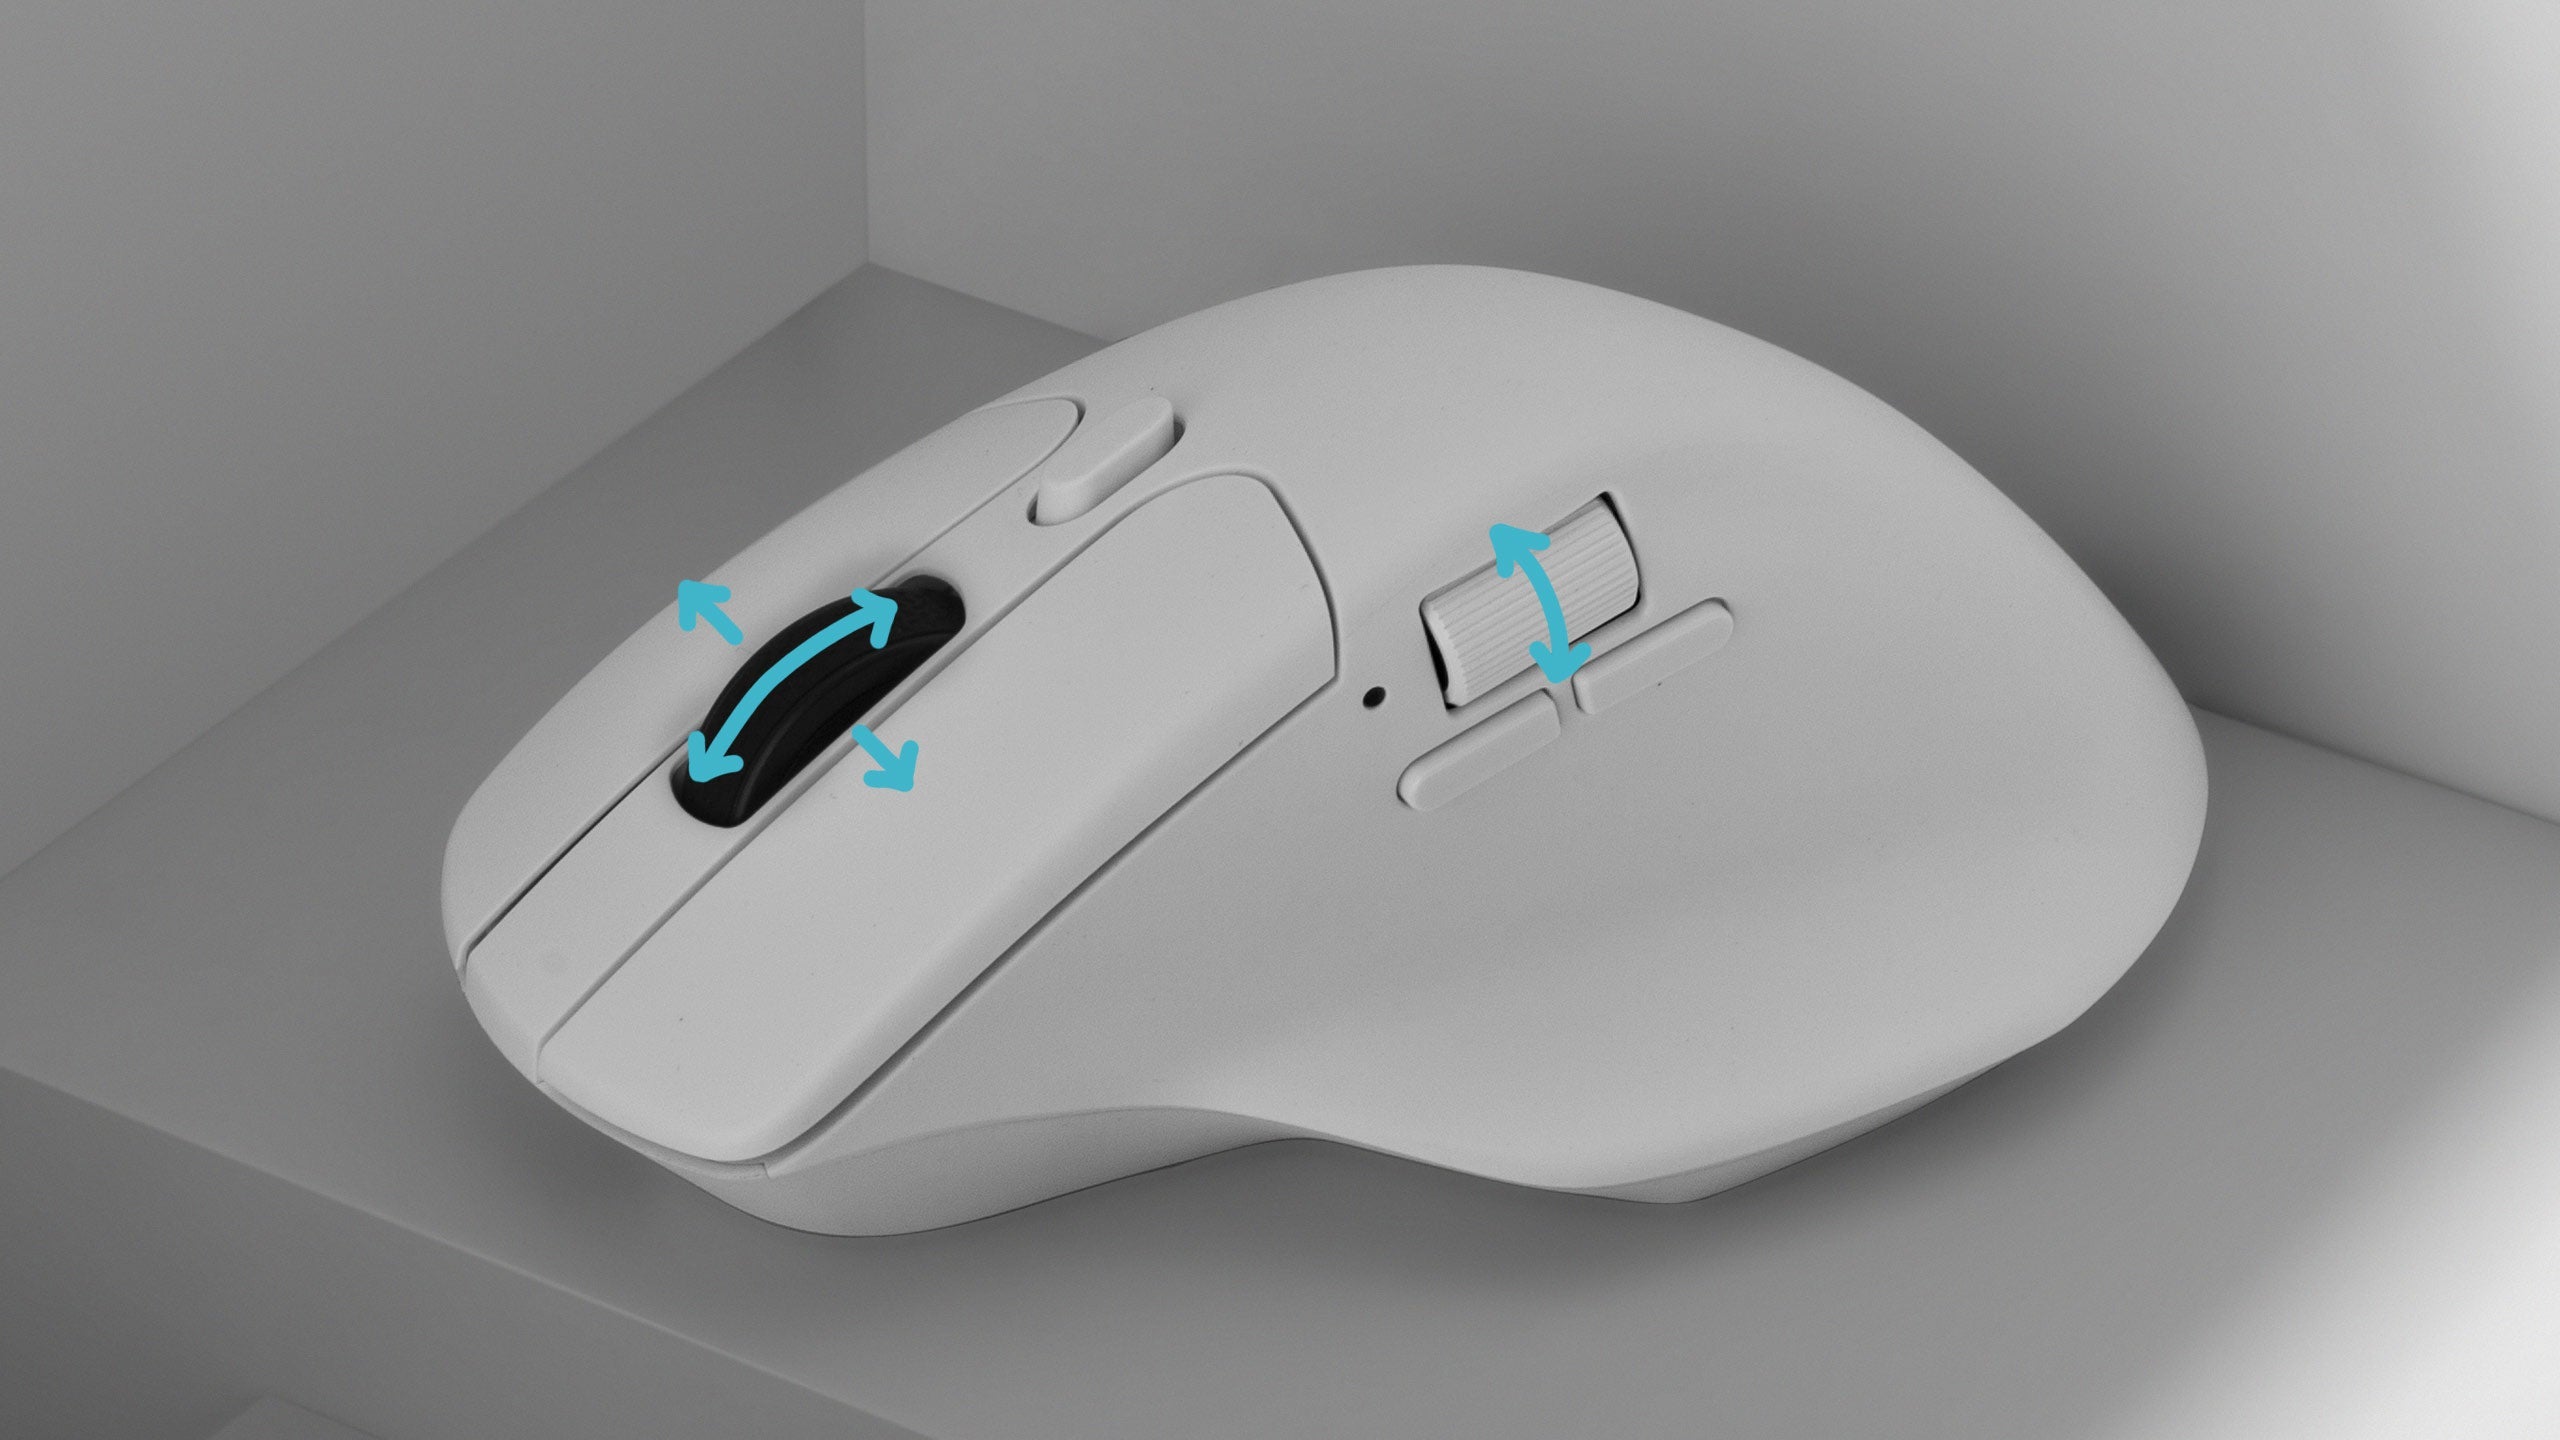 The Ultimate Ergonomic Design of Keychron M6 Wireless Mouse